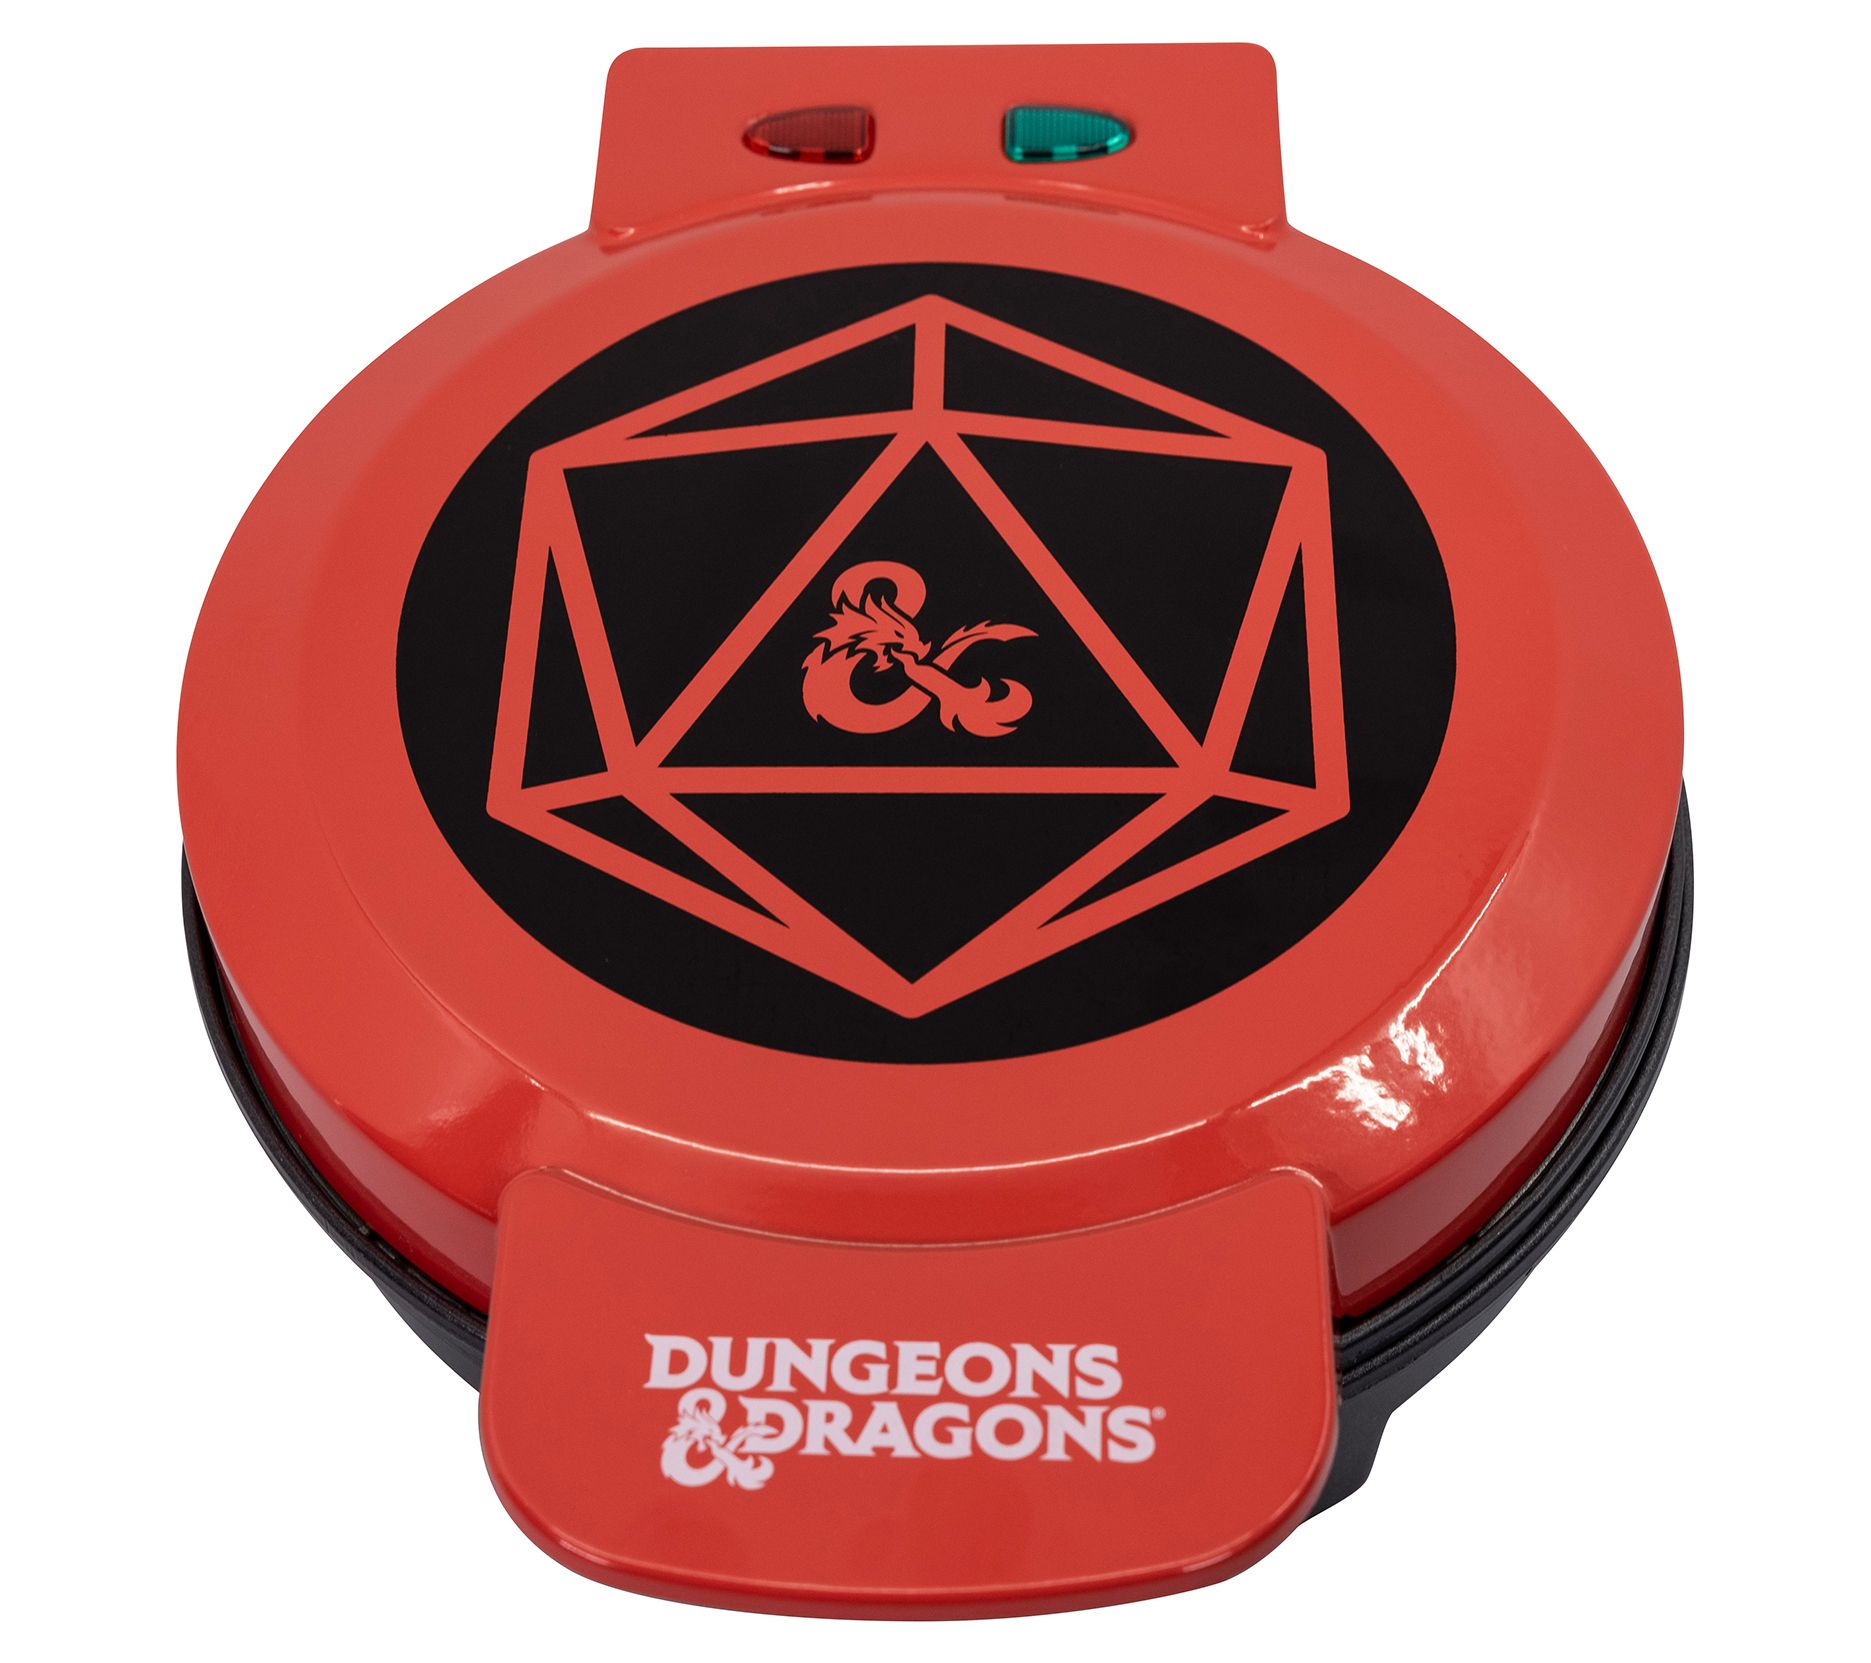 Dungeons & Dragons Red D20 Dice Printed Area Rug